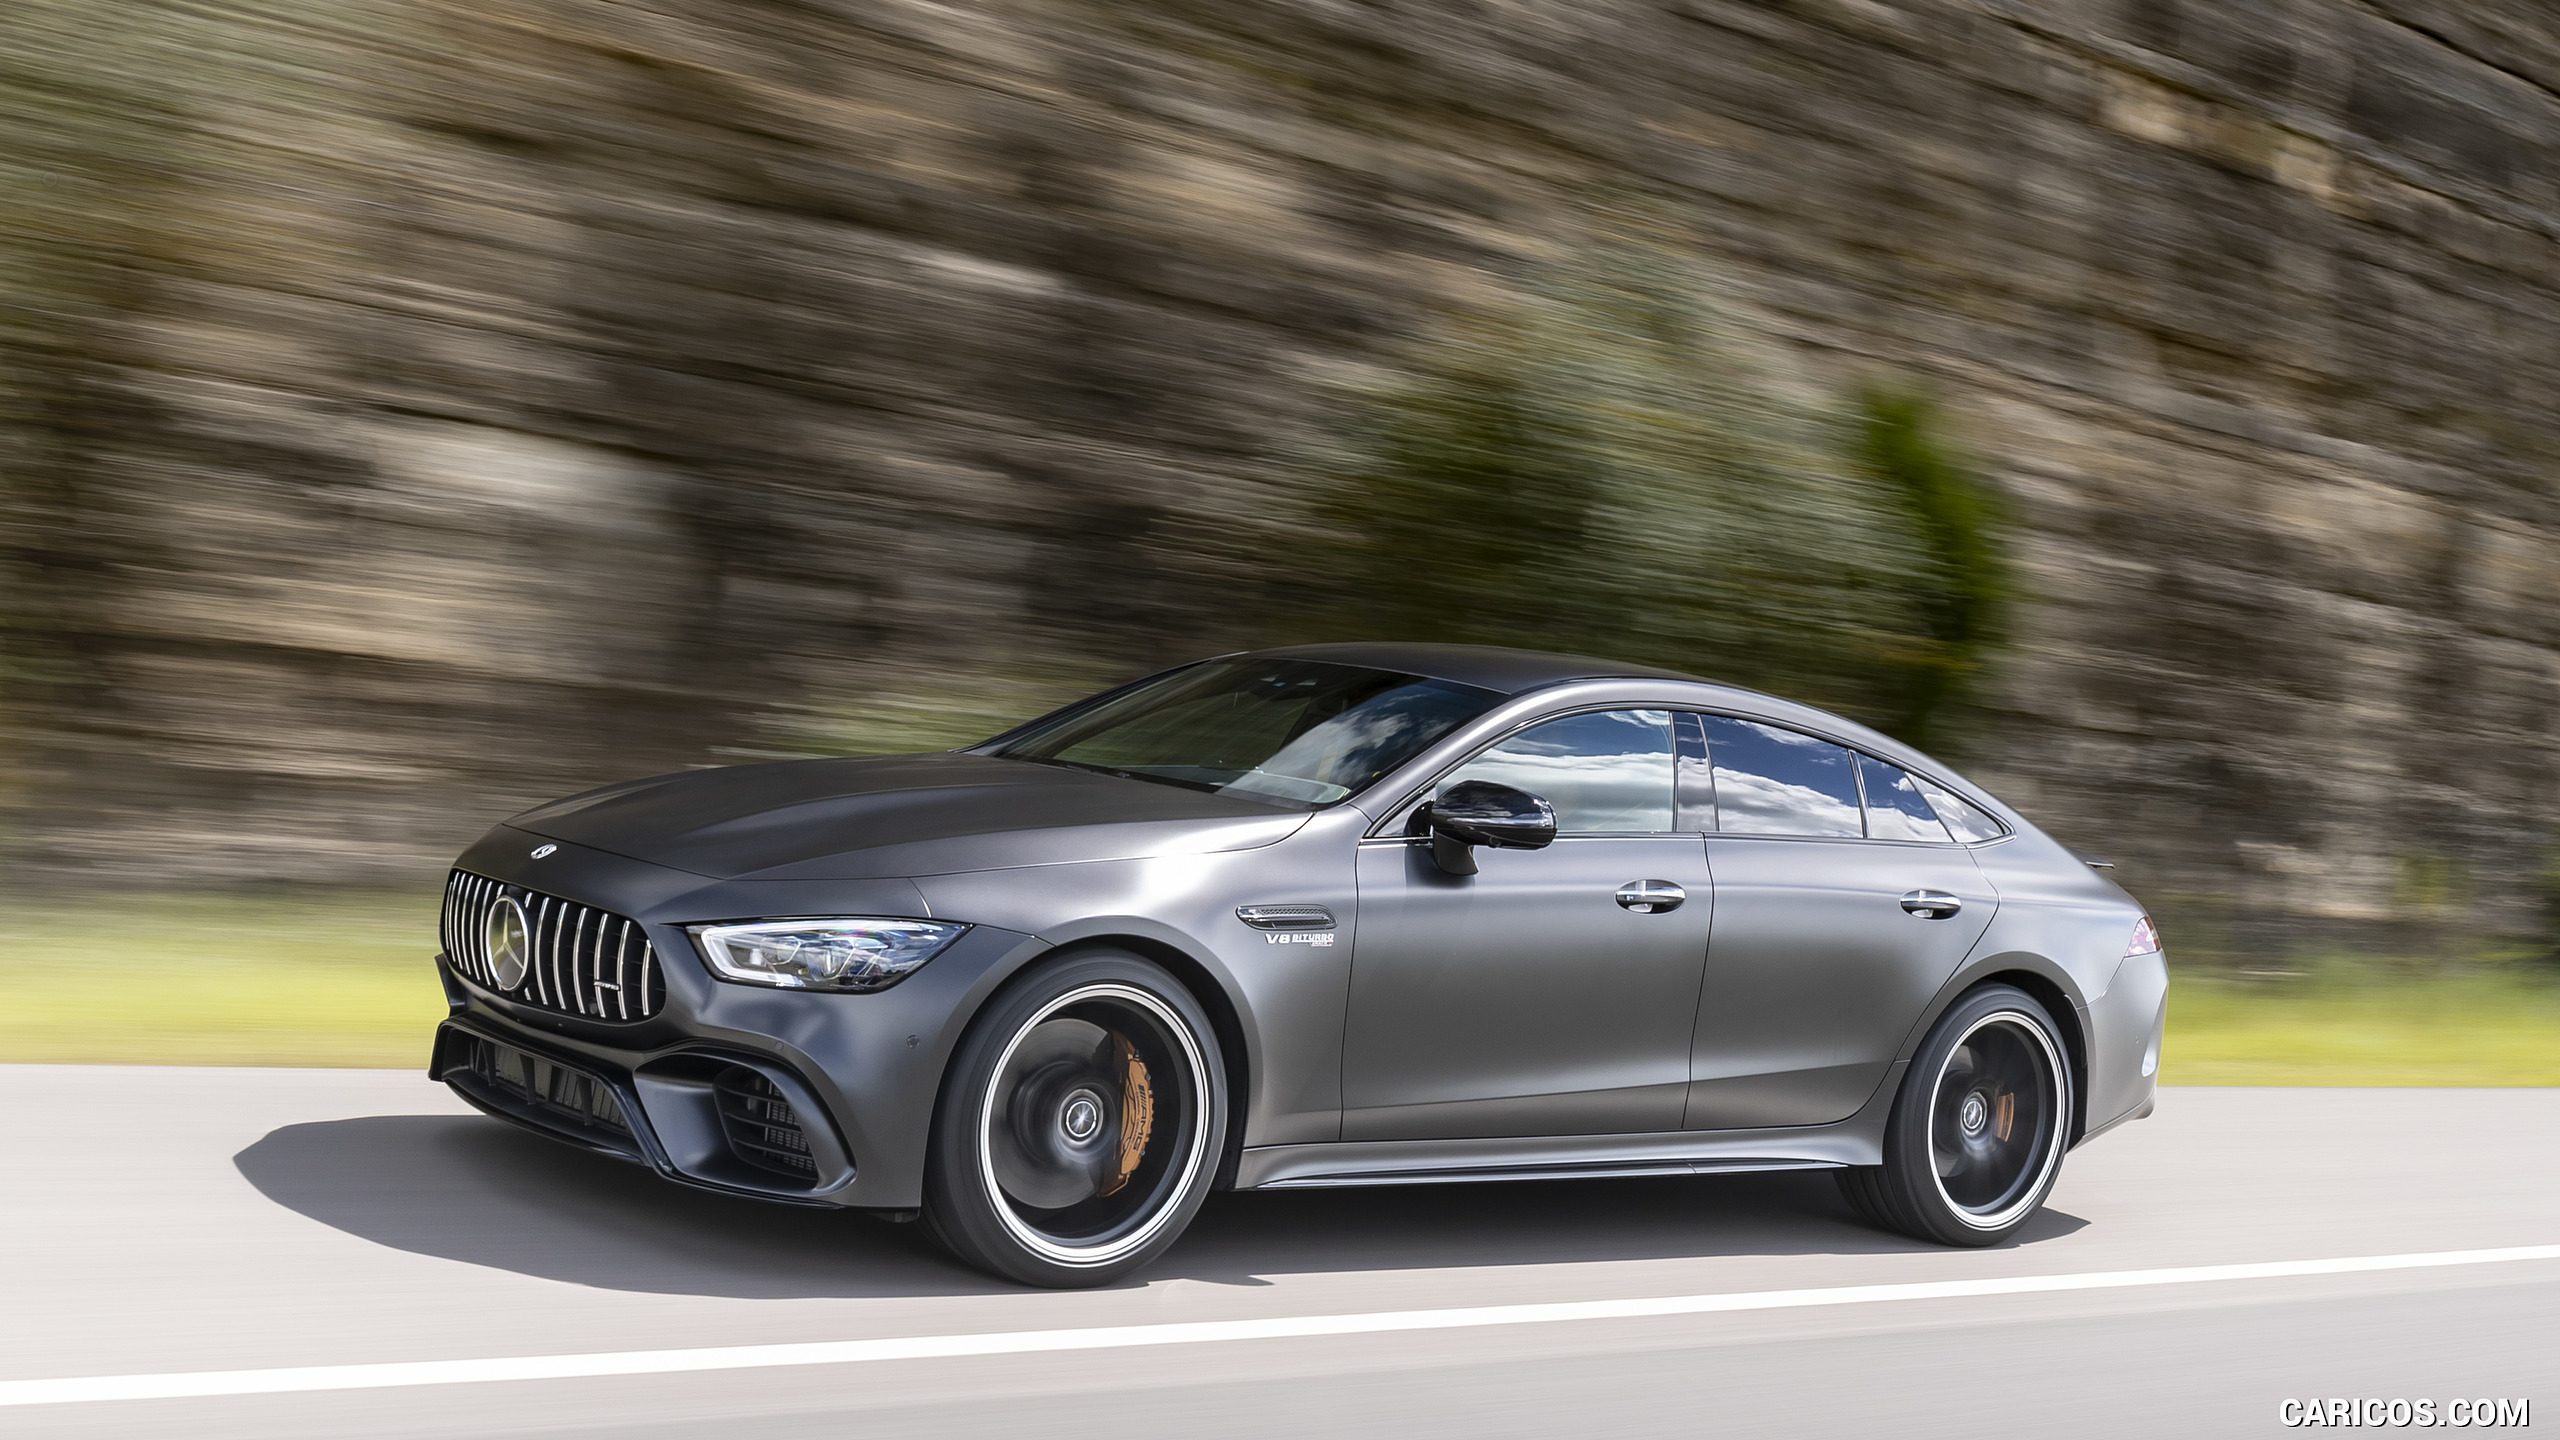 2019 Mercedes-AMG GT 63 S 4MATIC+ 4-Door Coupe - Front Three-Quarter, #191 of 427